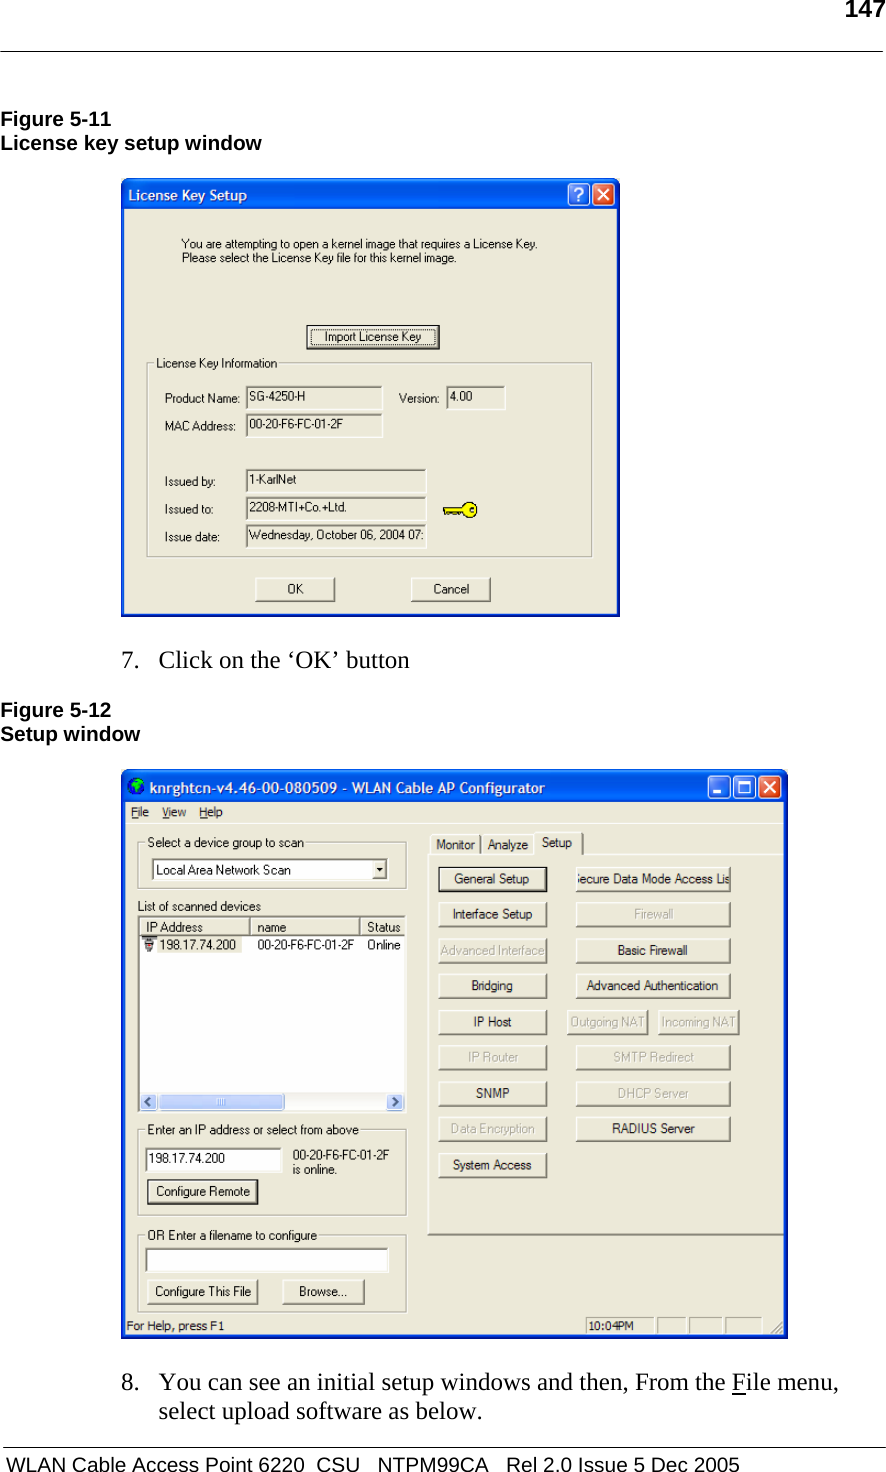   147   WLAN Cable Access Point 6220  CSU   NTPM99CA   Rel 2.0 Issue 5 Dec 2005 Figure 5-11 License key setup window    7. Click on the ‘OK’ button   Figure 5-12 Setup window    8. You can see an initial setup windows and then, From the File menu, select upload software as below. 